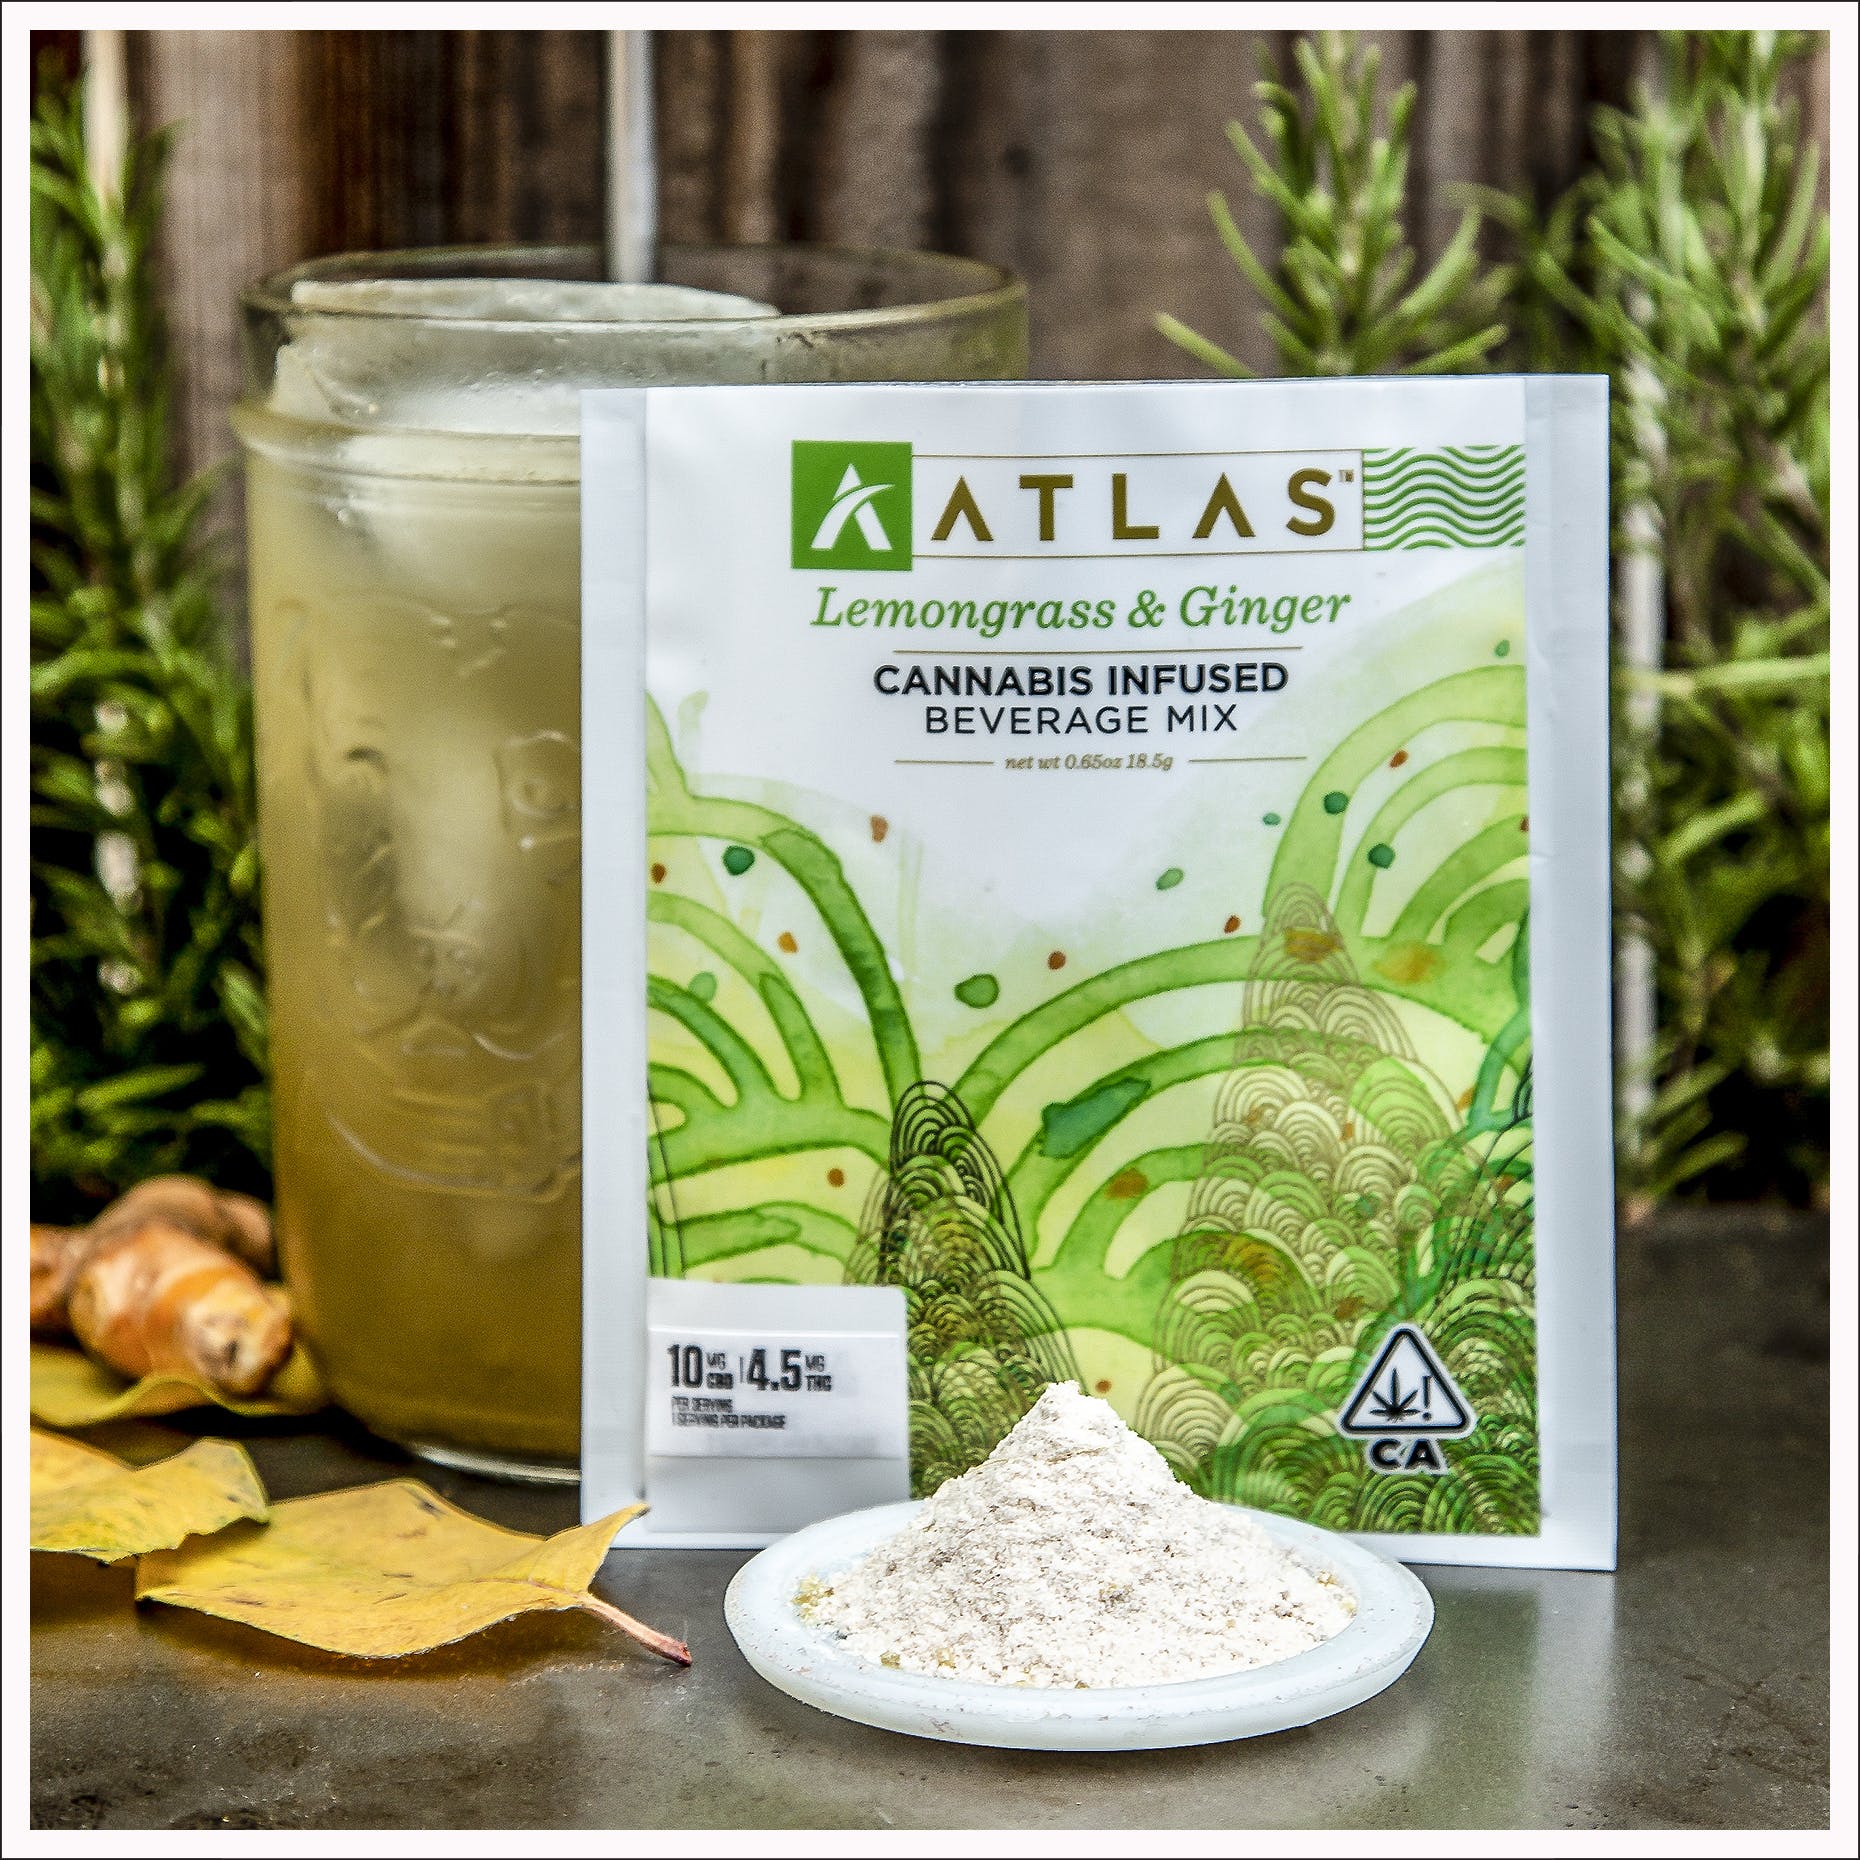 Lemongrass Ginger Cannabis Infused Beverage Mix by Atlas